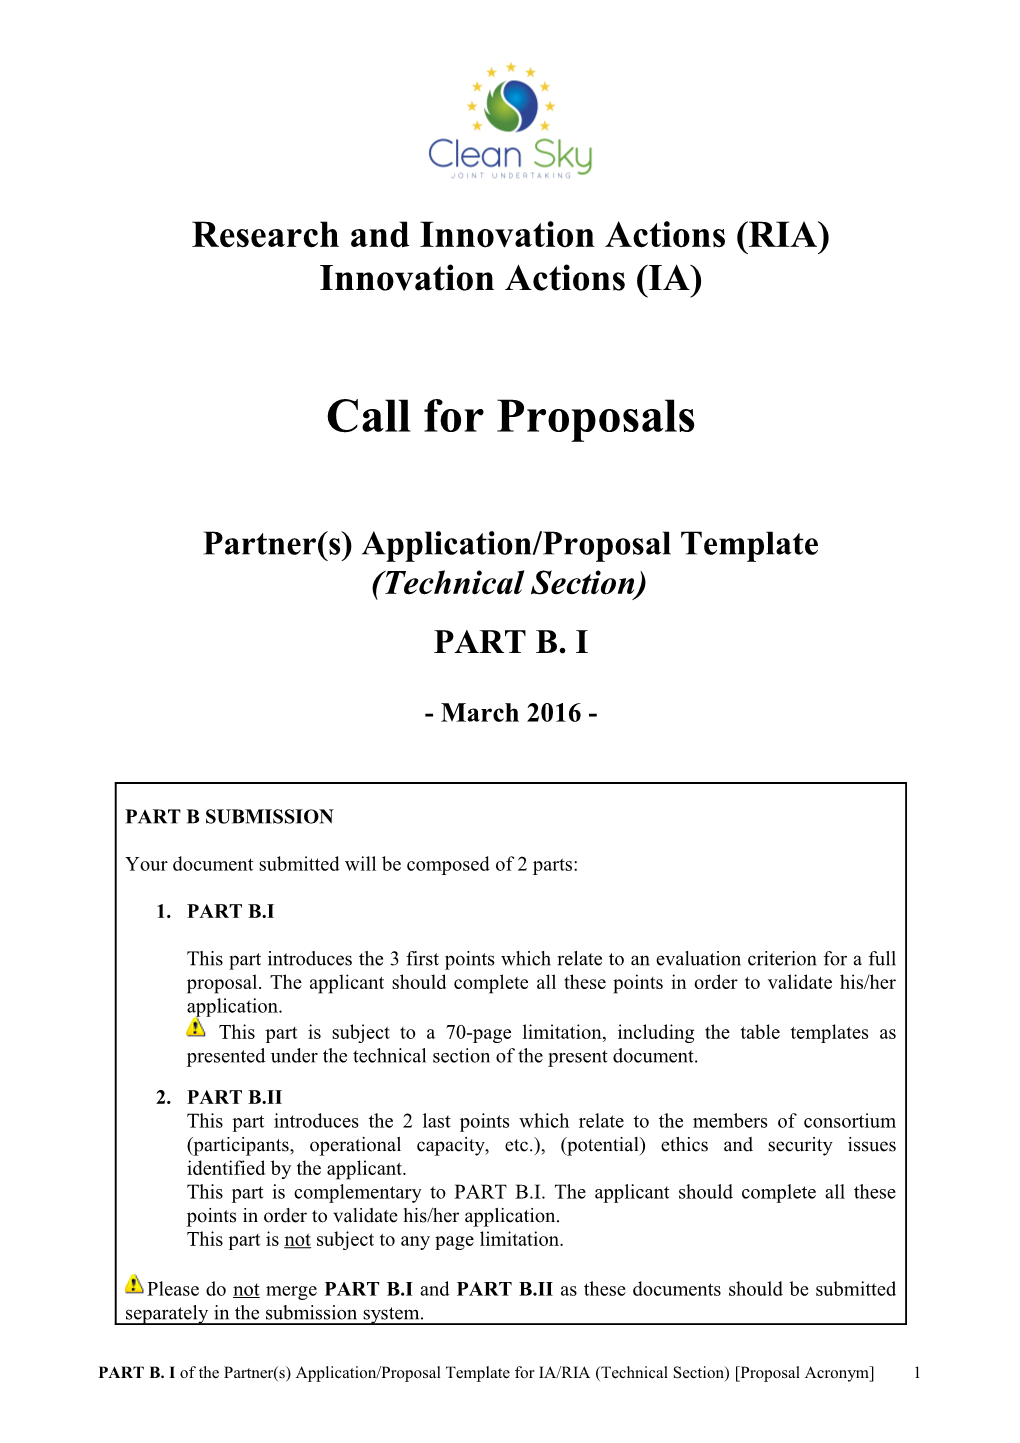 Research and Innovation Actions (RIA) s1